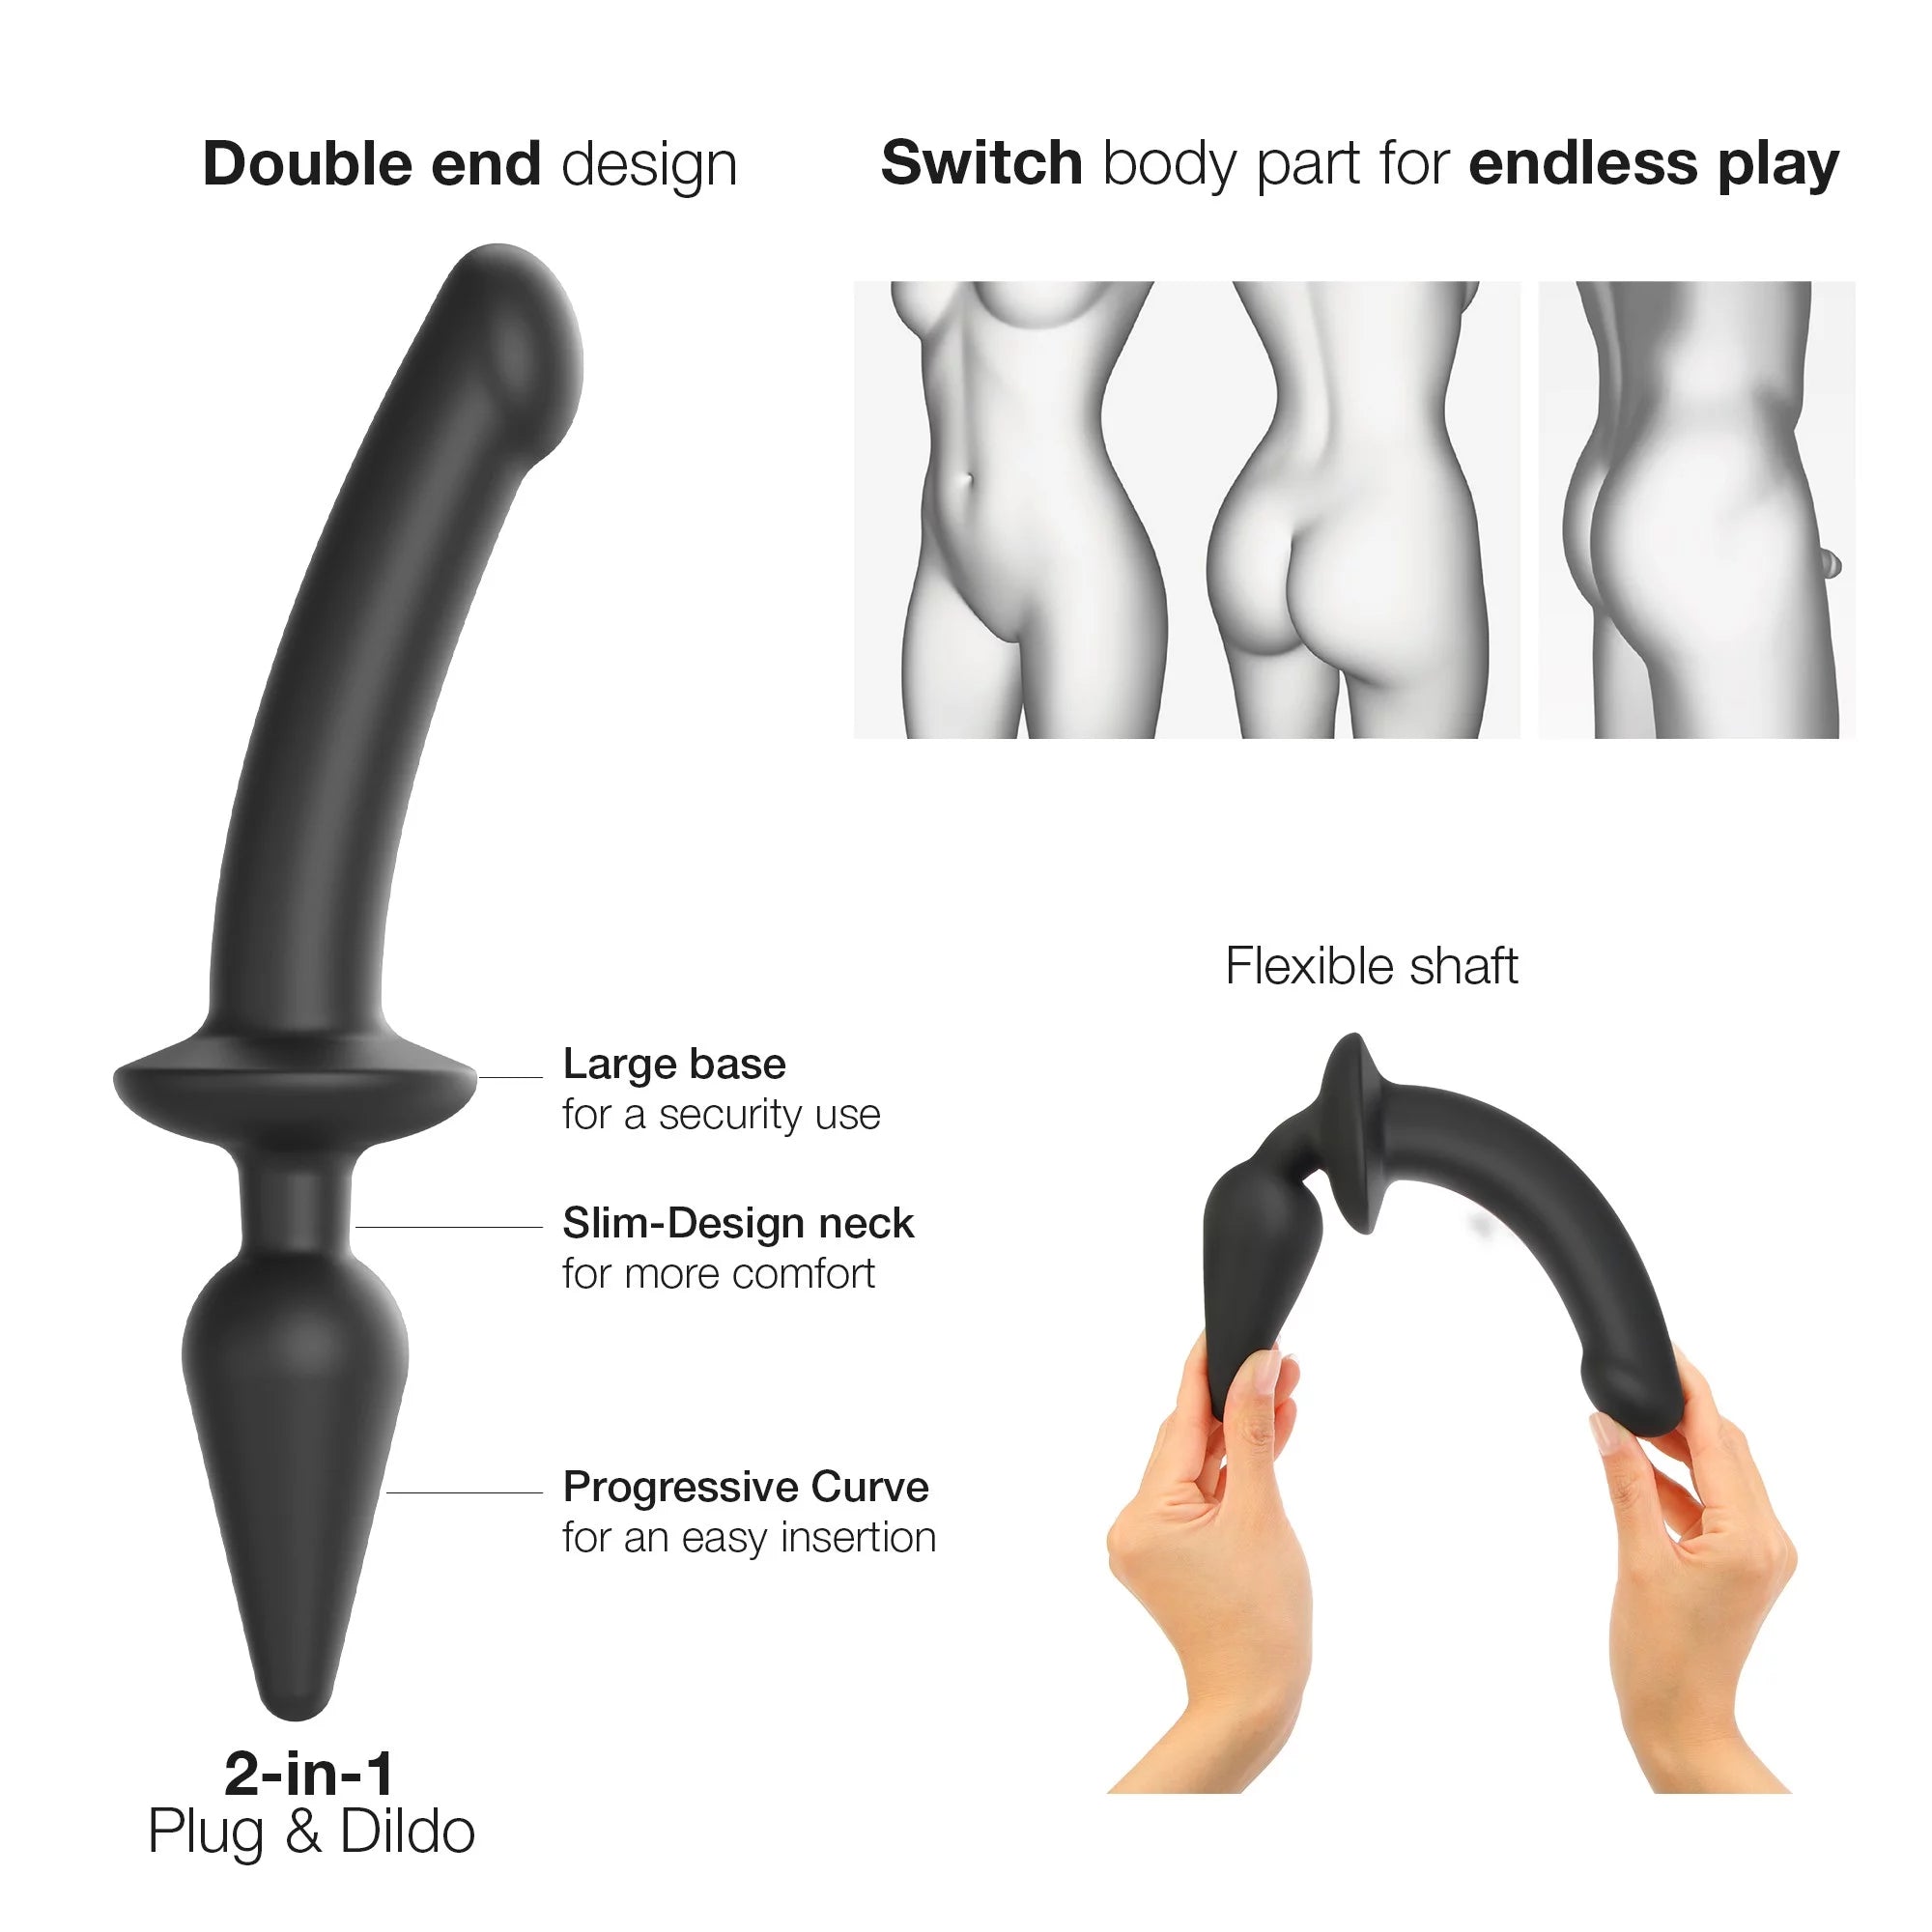 Strap-On-Me Hybrid Collection Switch Plug-In Dual-Ended Dildo & Plug - Black